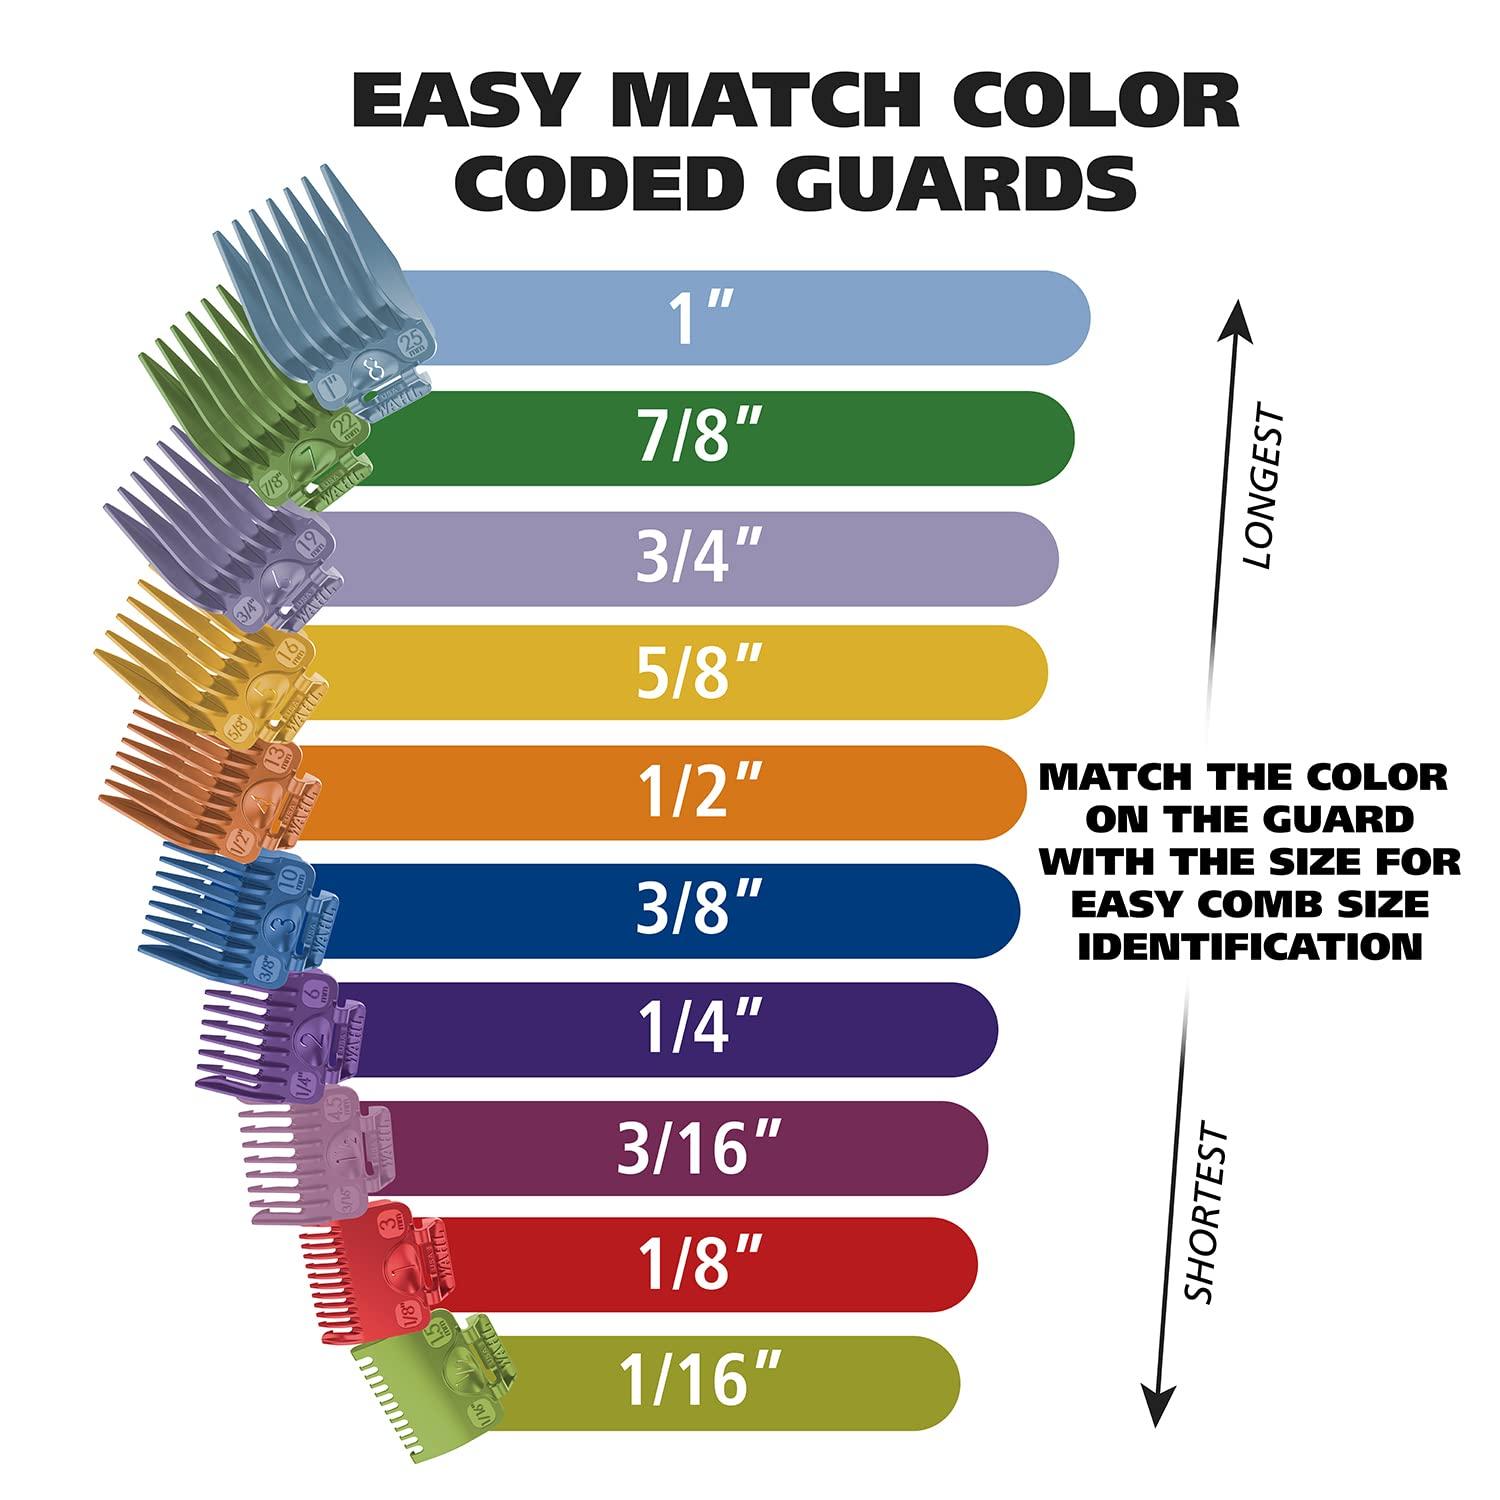 Grooming Hair Length Sample Charts by Kreations By Kohler - *2 MORE DAYS!  Get 15% off any chart order!! All grooming salons can benefit from these